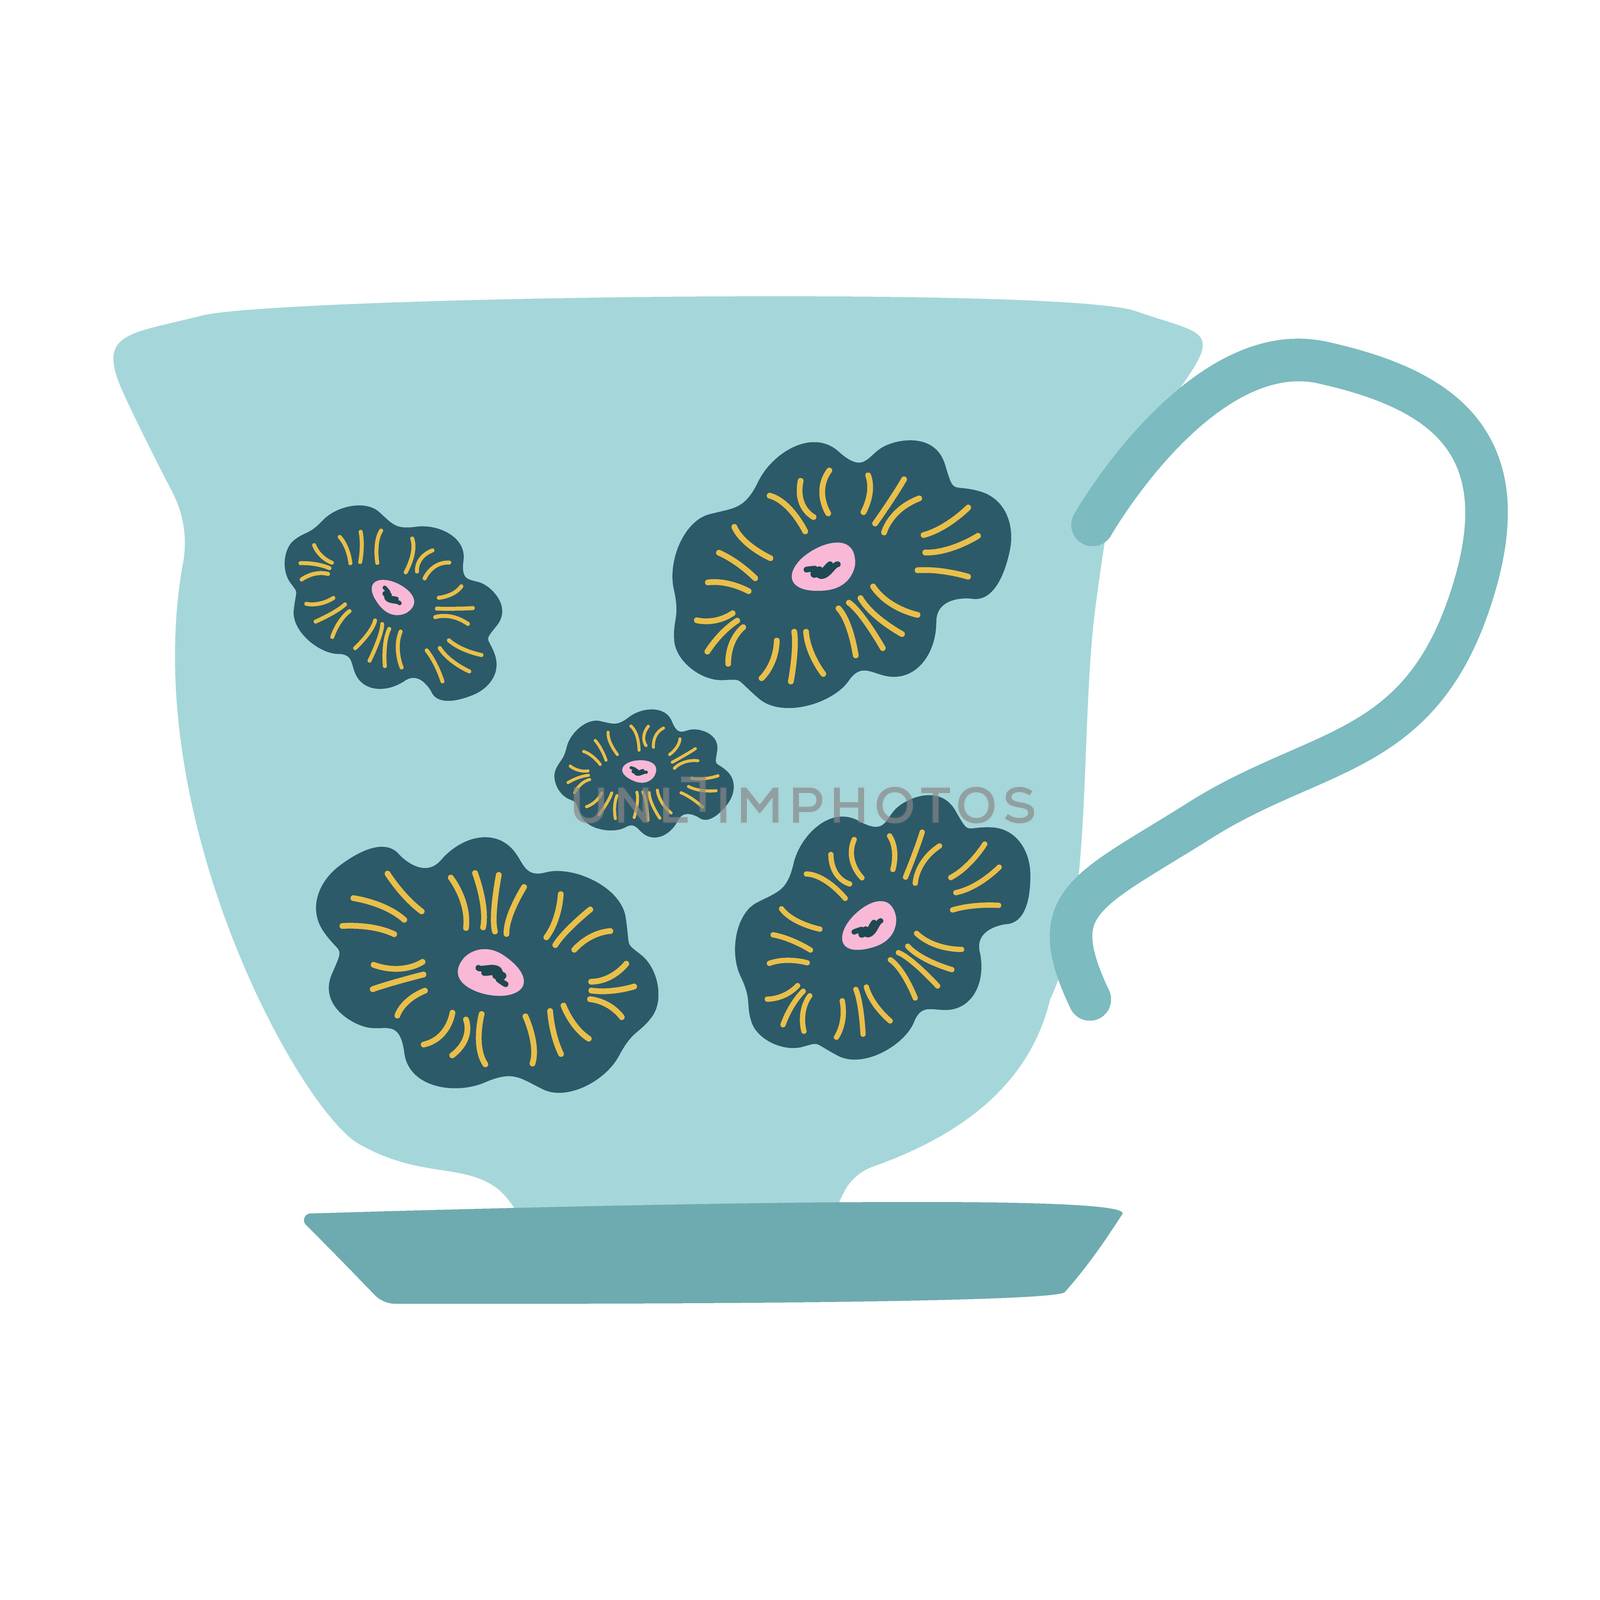 Retro light blue tea cup with teal color flowers. Isolated on white background. Flat cartoon style. Vector Illustration.